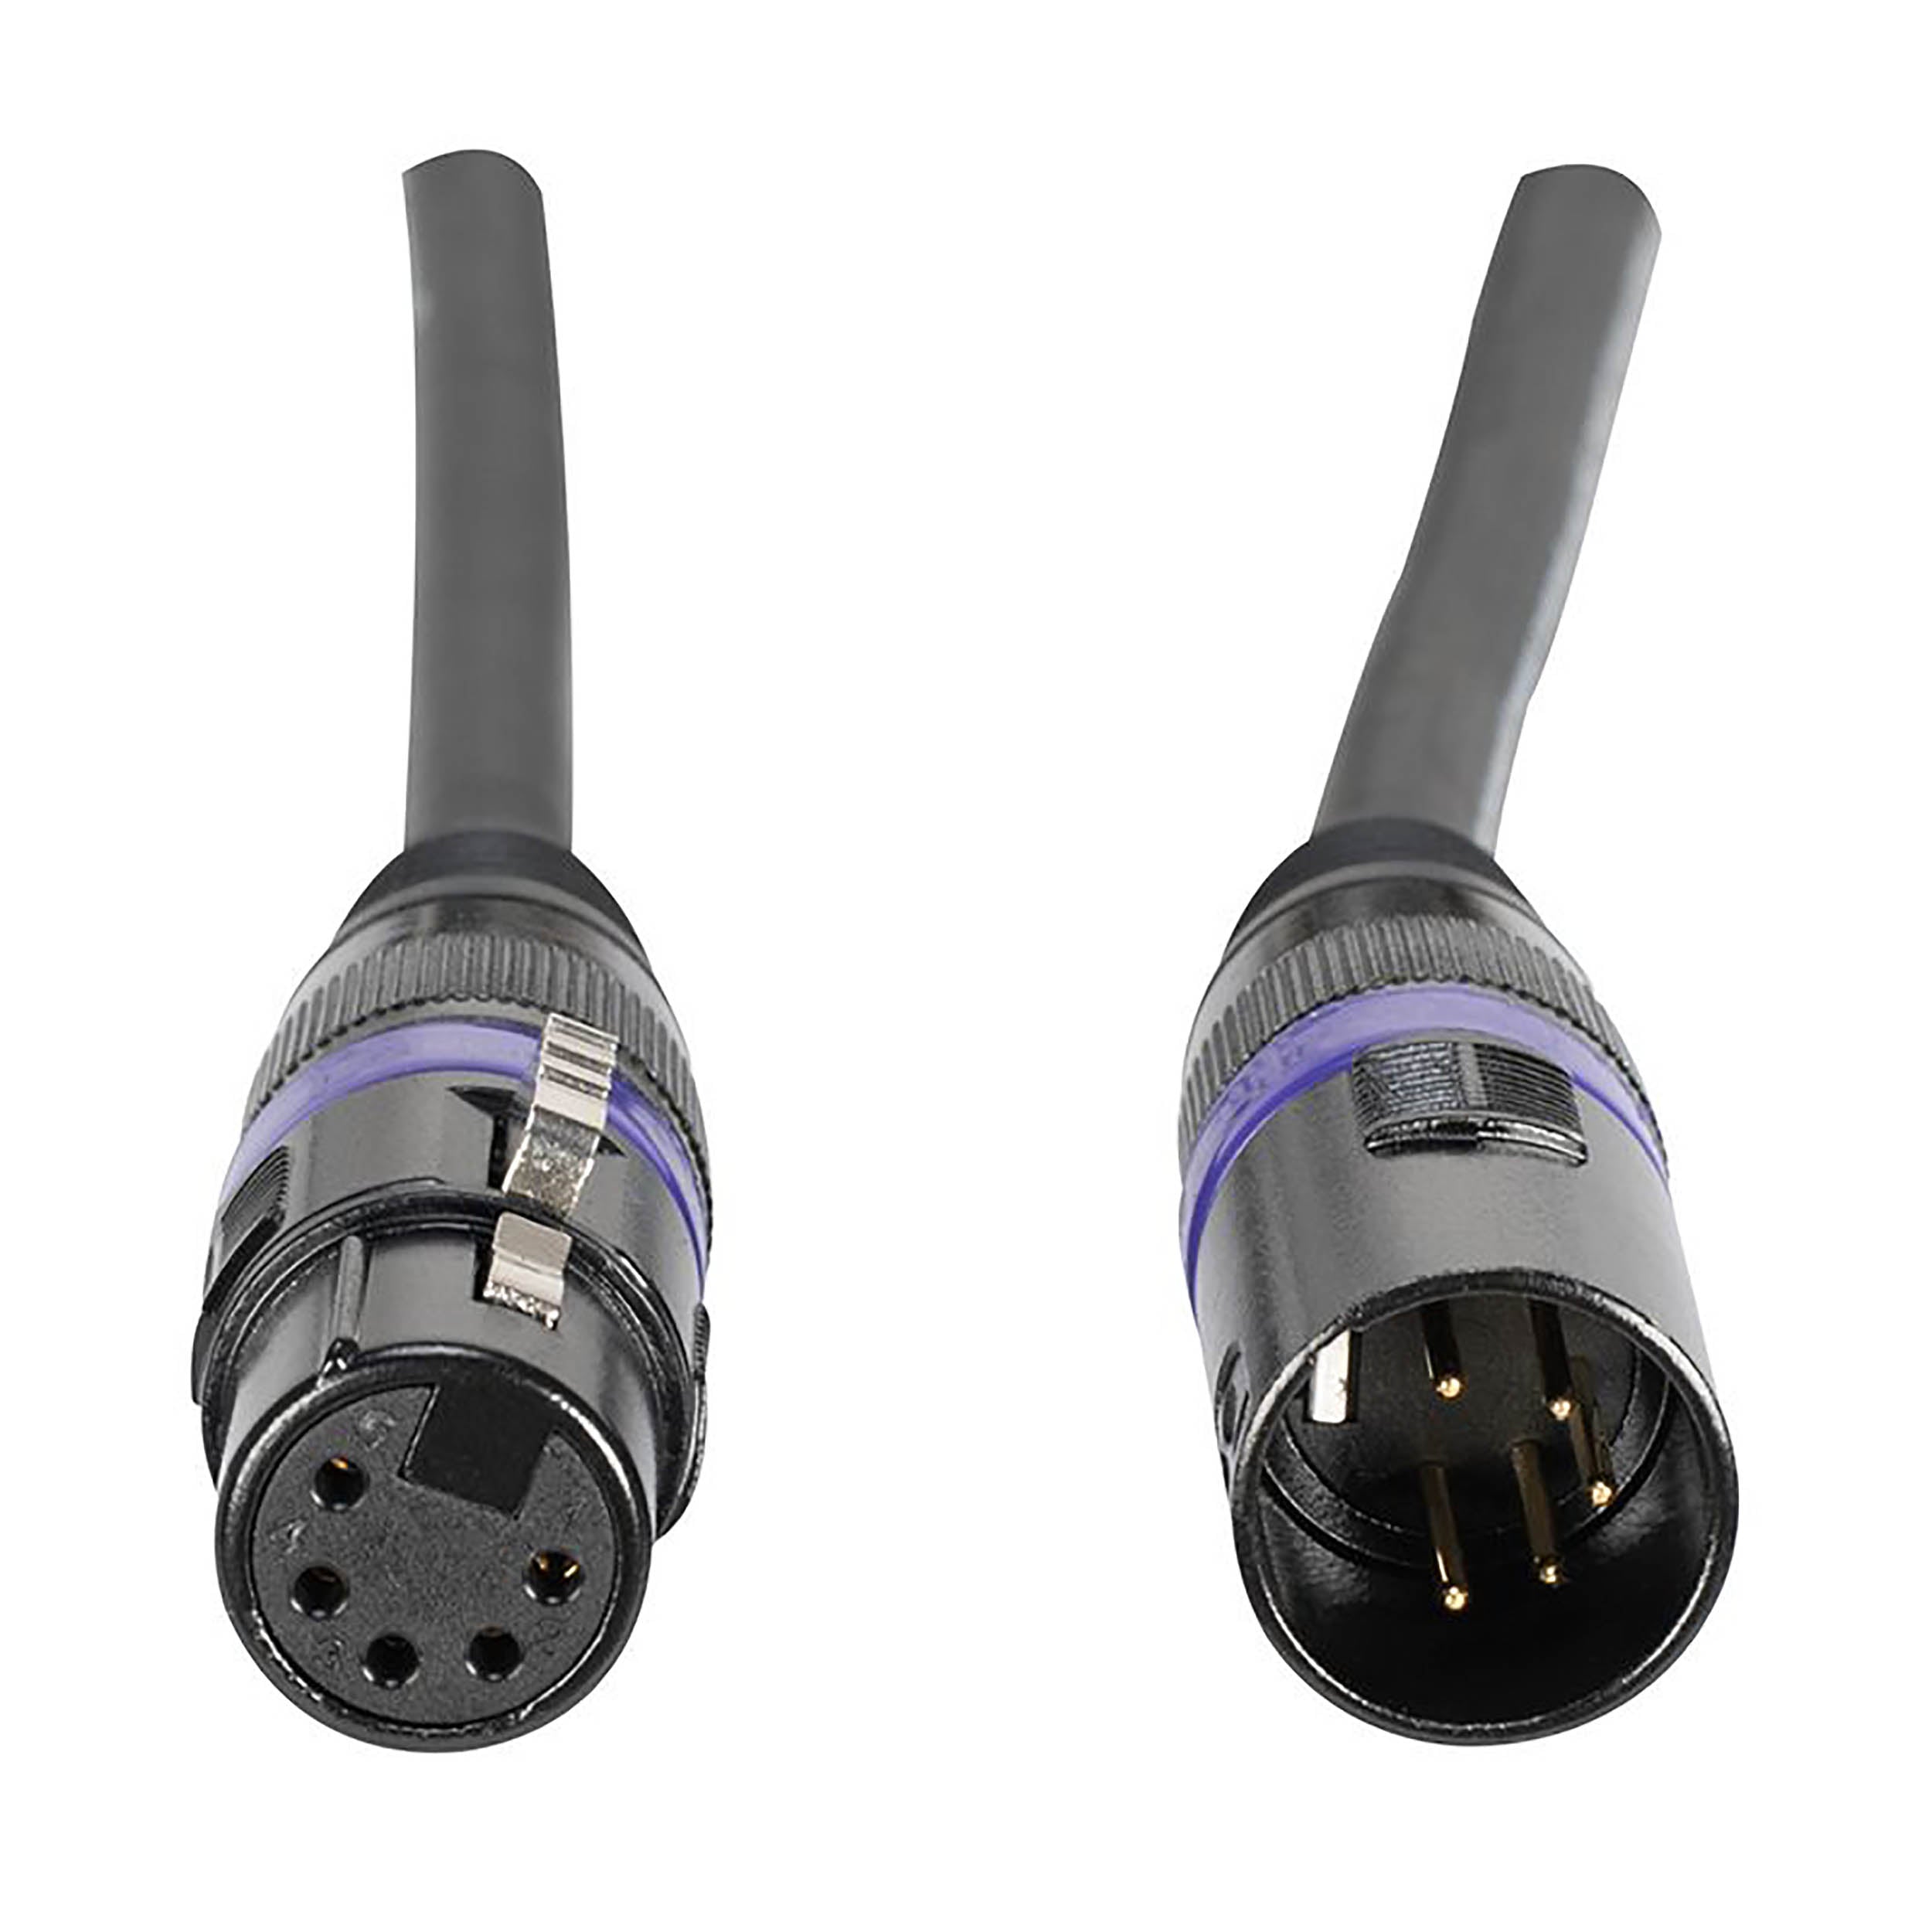 Accu-Cable AC5PDMX100, 5-Pin Male To 5-Pin Female Connection DMX Cable - 100 Ft by Accu Cable